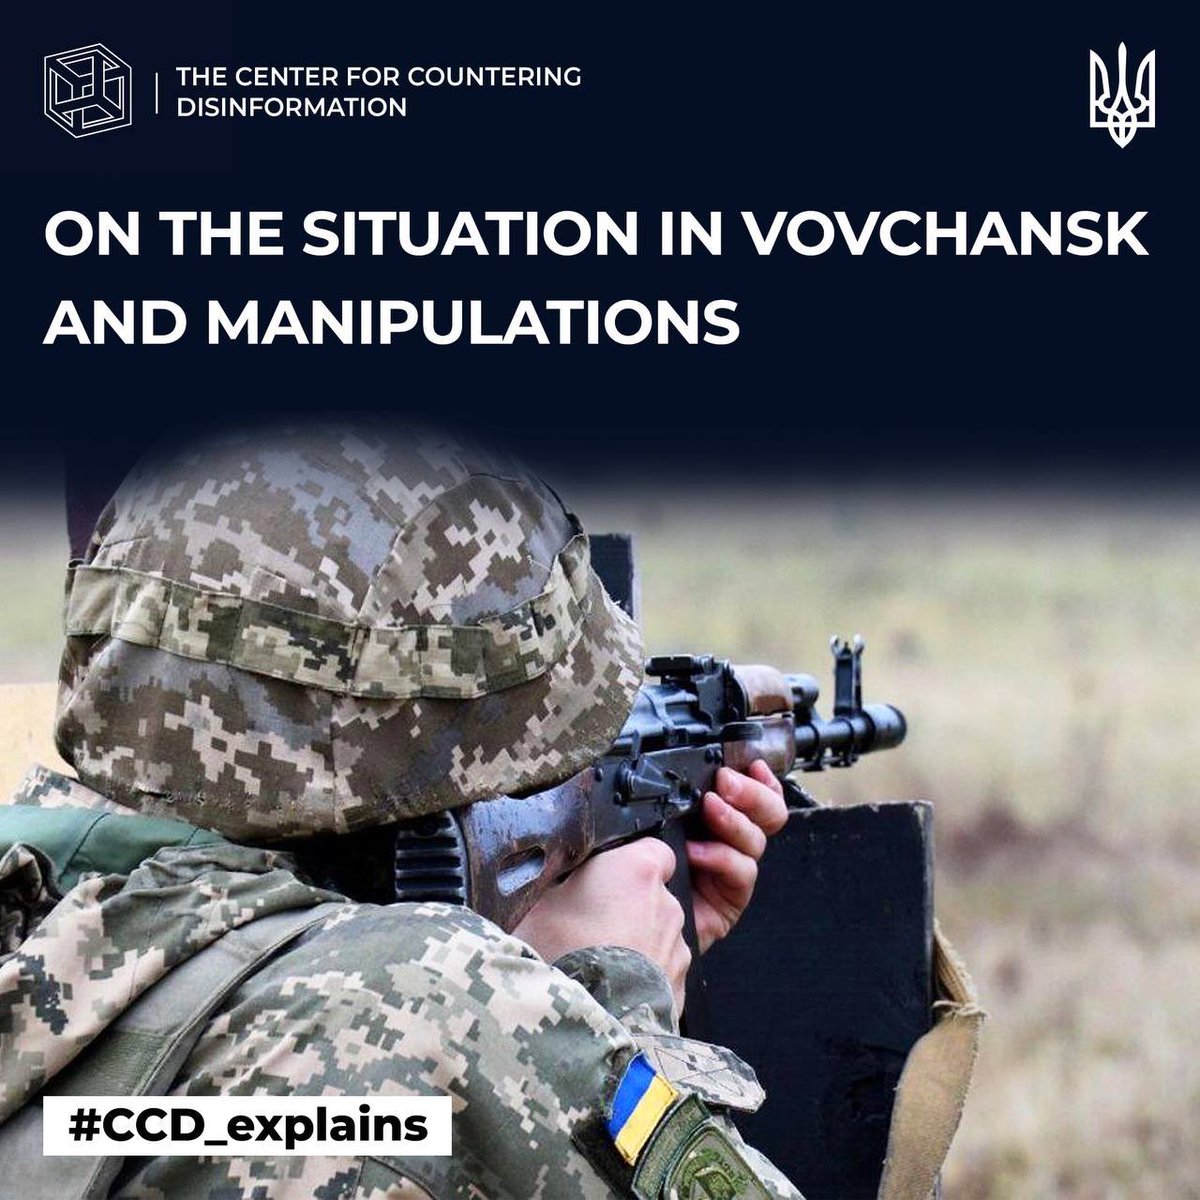 #CCD_informs:

⚡️ About the situation in Vovchansk and manipulations

Reports are being circulated in the Ukrainian information space about the alleged complete occupation of the city of Vovchansk in Kharkiv region by russian troops.